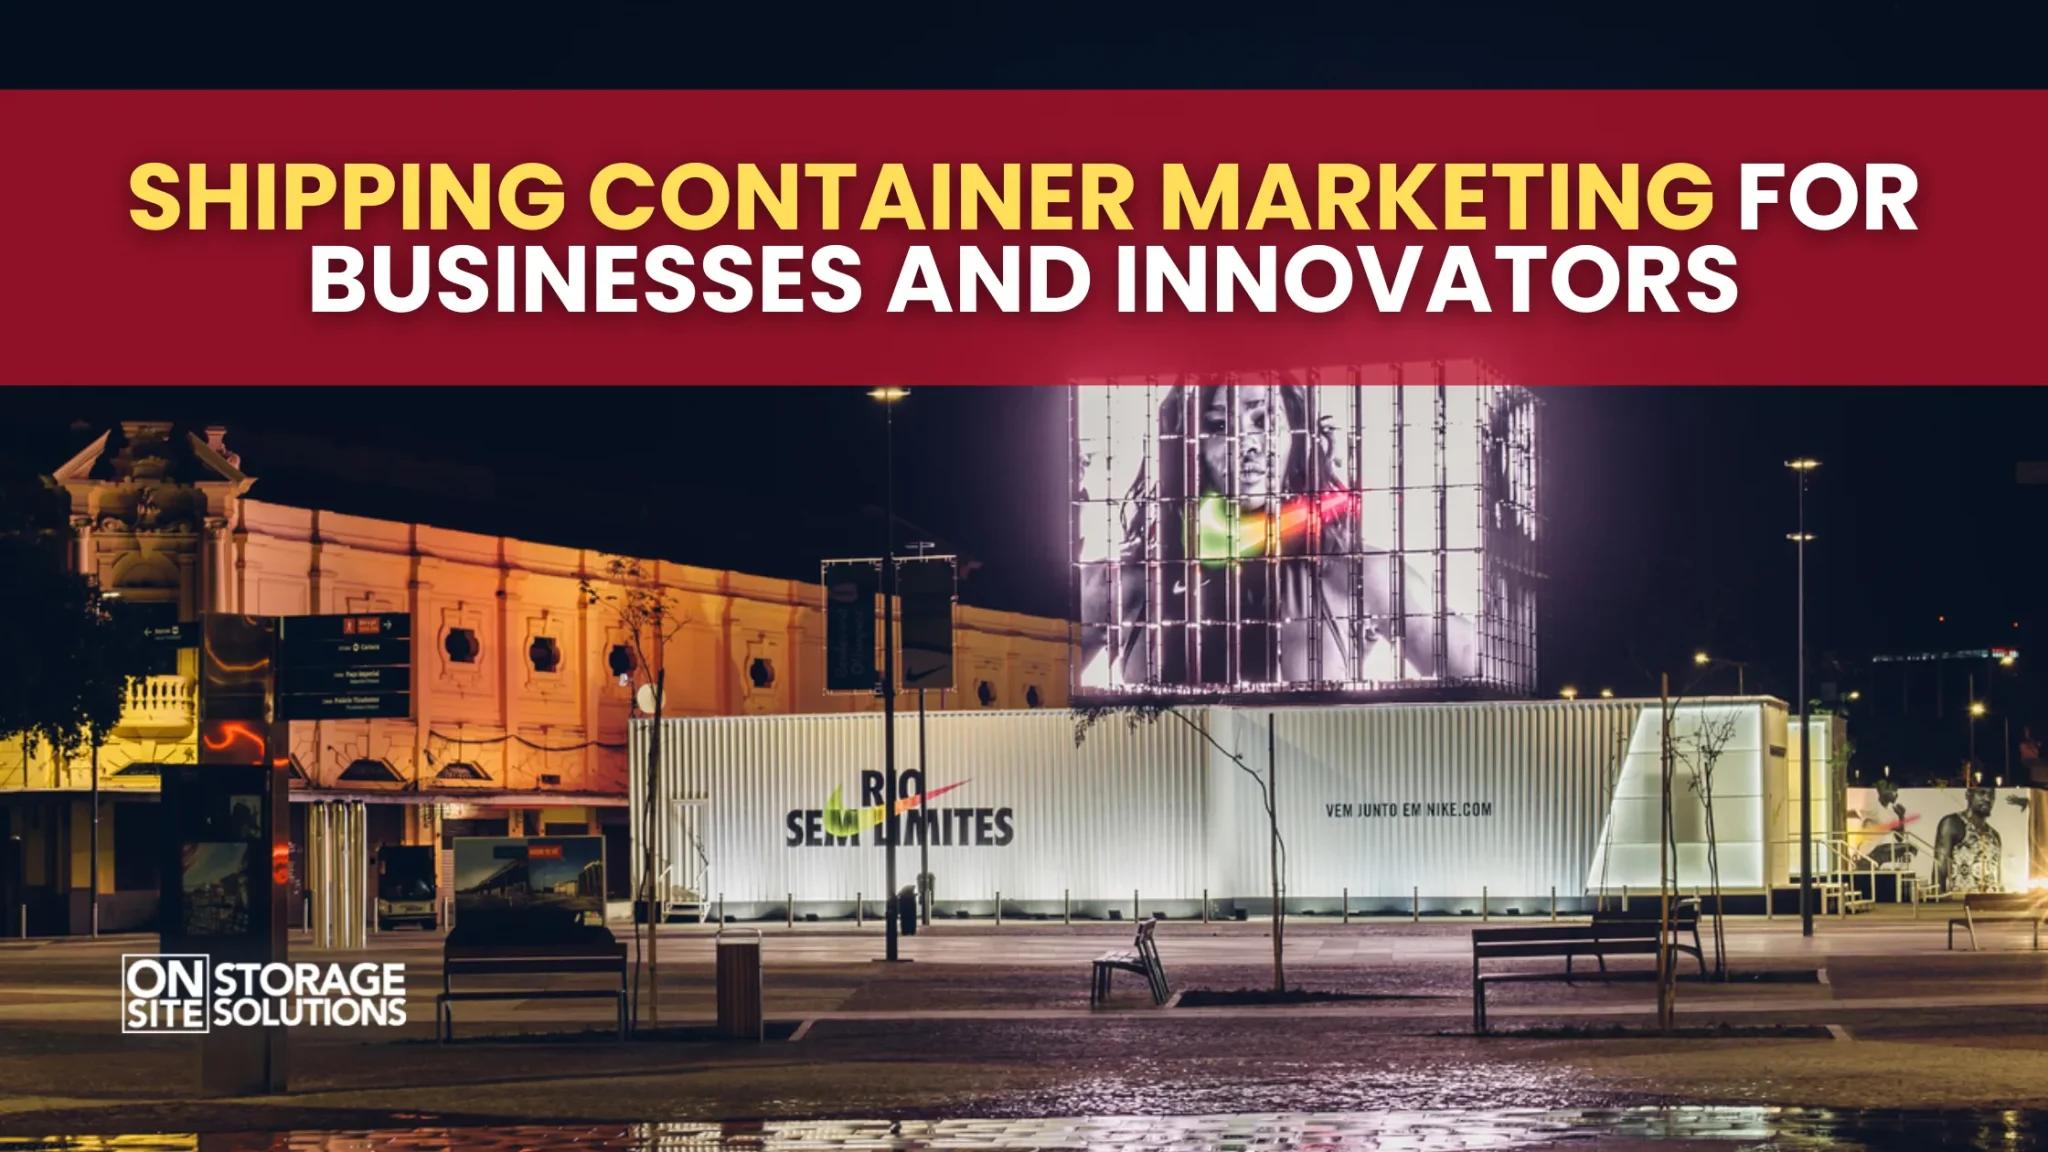 Shipping Container Marketing for Businesses and Innovators